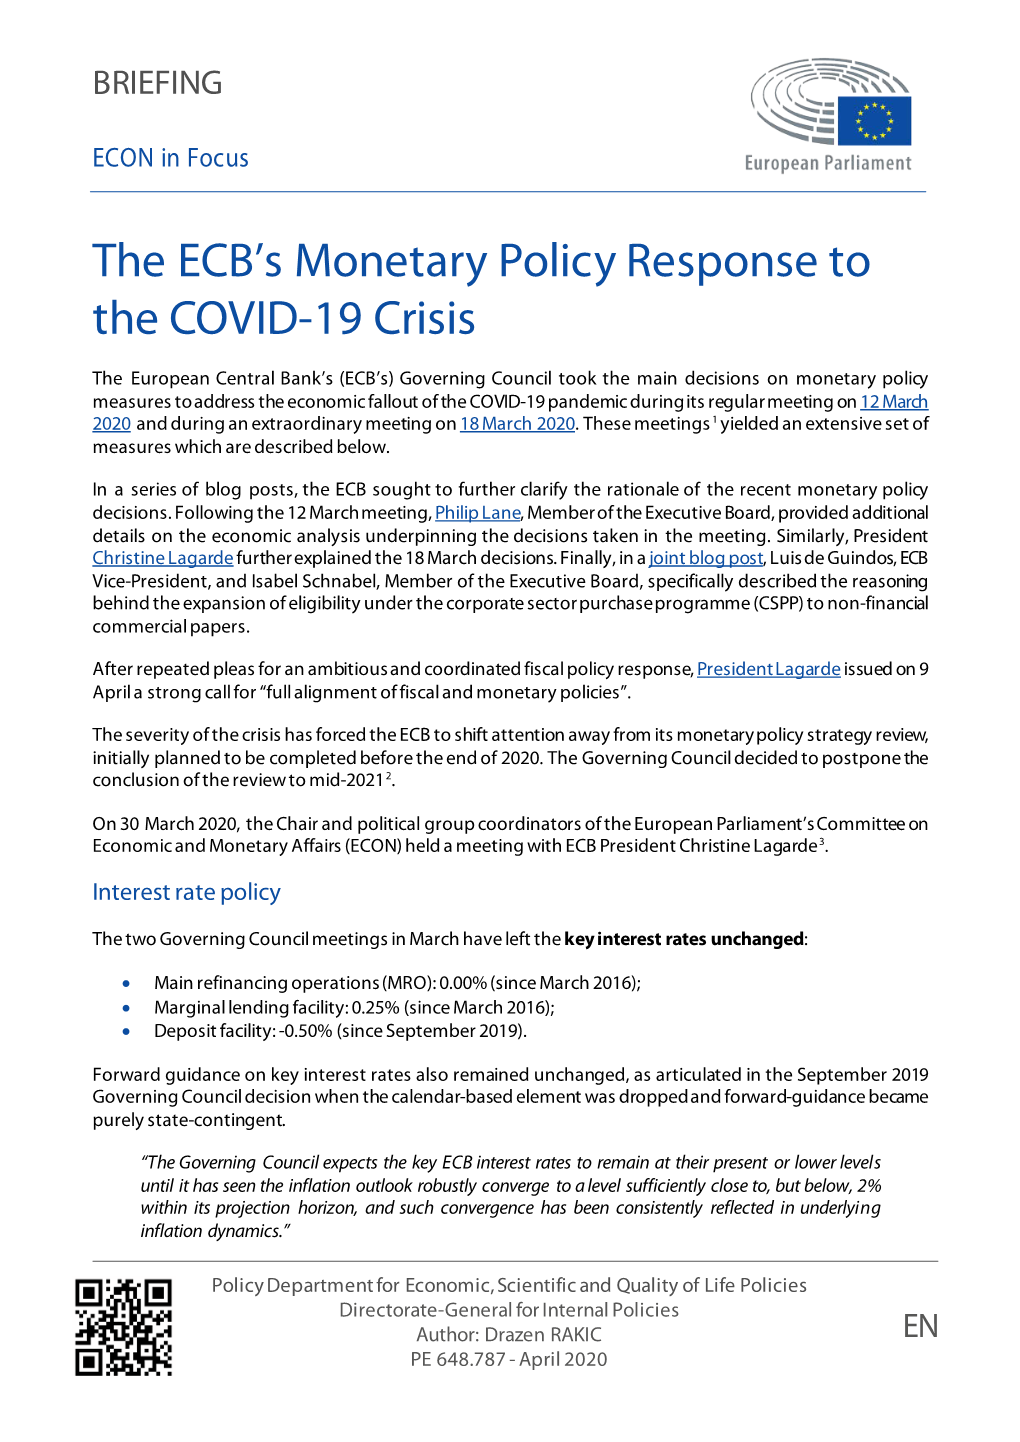 The ECB's Monetary Policy Response to the COVID-19 Crisis